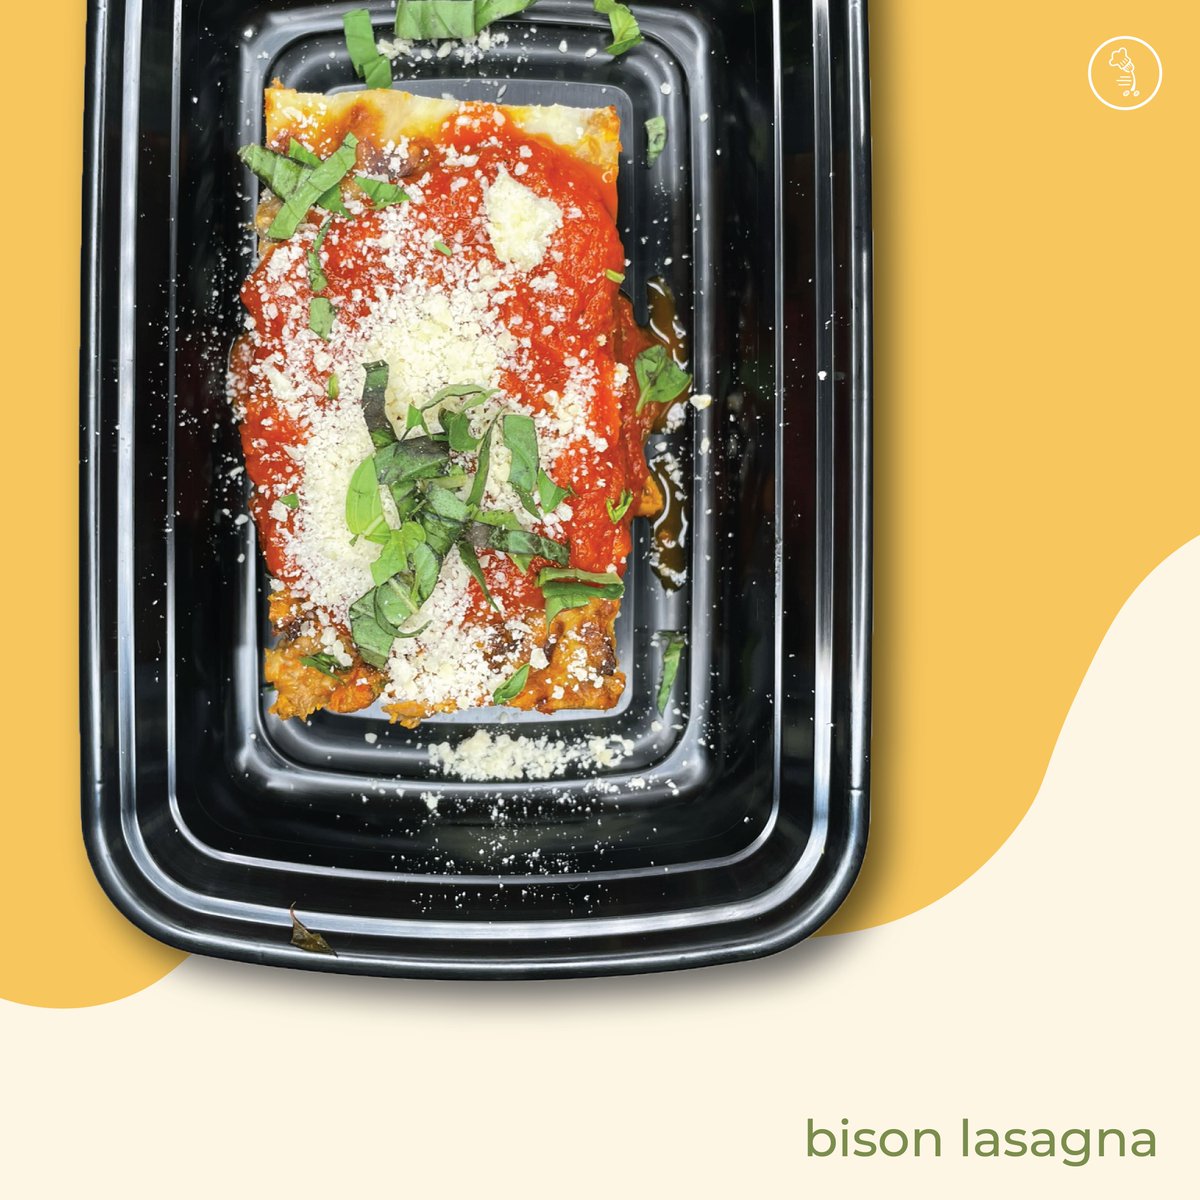 Bison Lasagna is back! Come get your hands on this layered deliciousness: hubs.la/Q02vypYv0 #feelgoodmealsnc
.
.
.
#belmontncliving #gastonia #southcarolina #northcarolina #cramerton #lakewylie